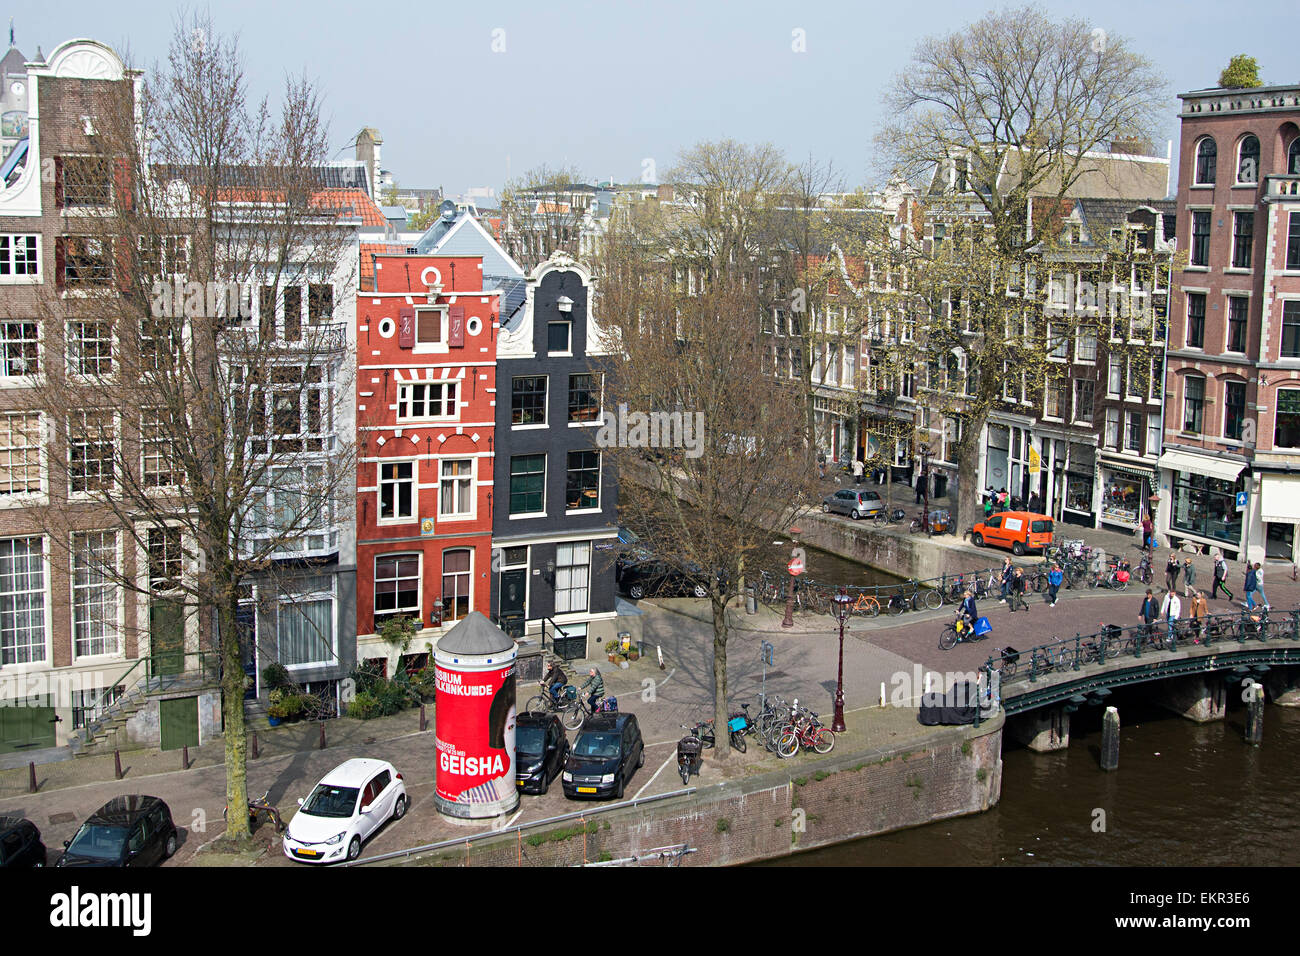 Lovely canal-side scene with unique tall narrow houses overlooking canals and bridge in Amsterdam. Stock Photo